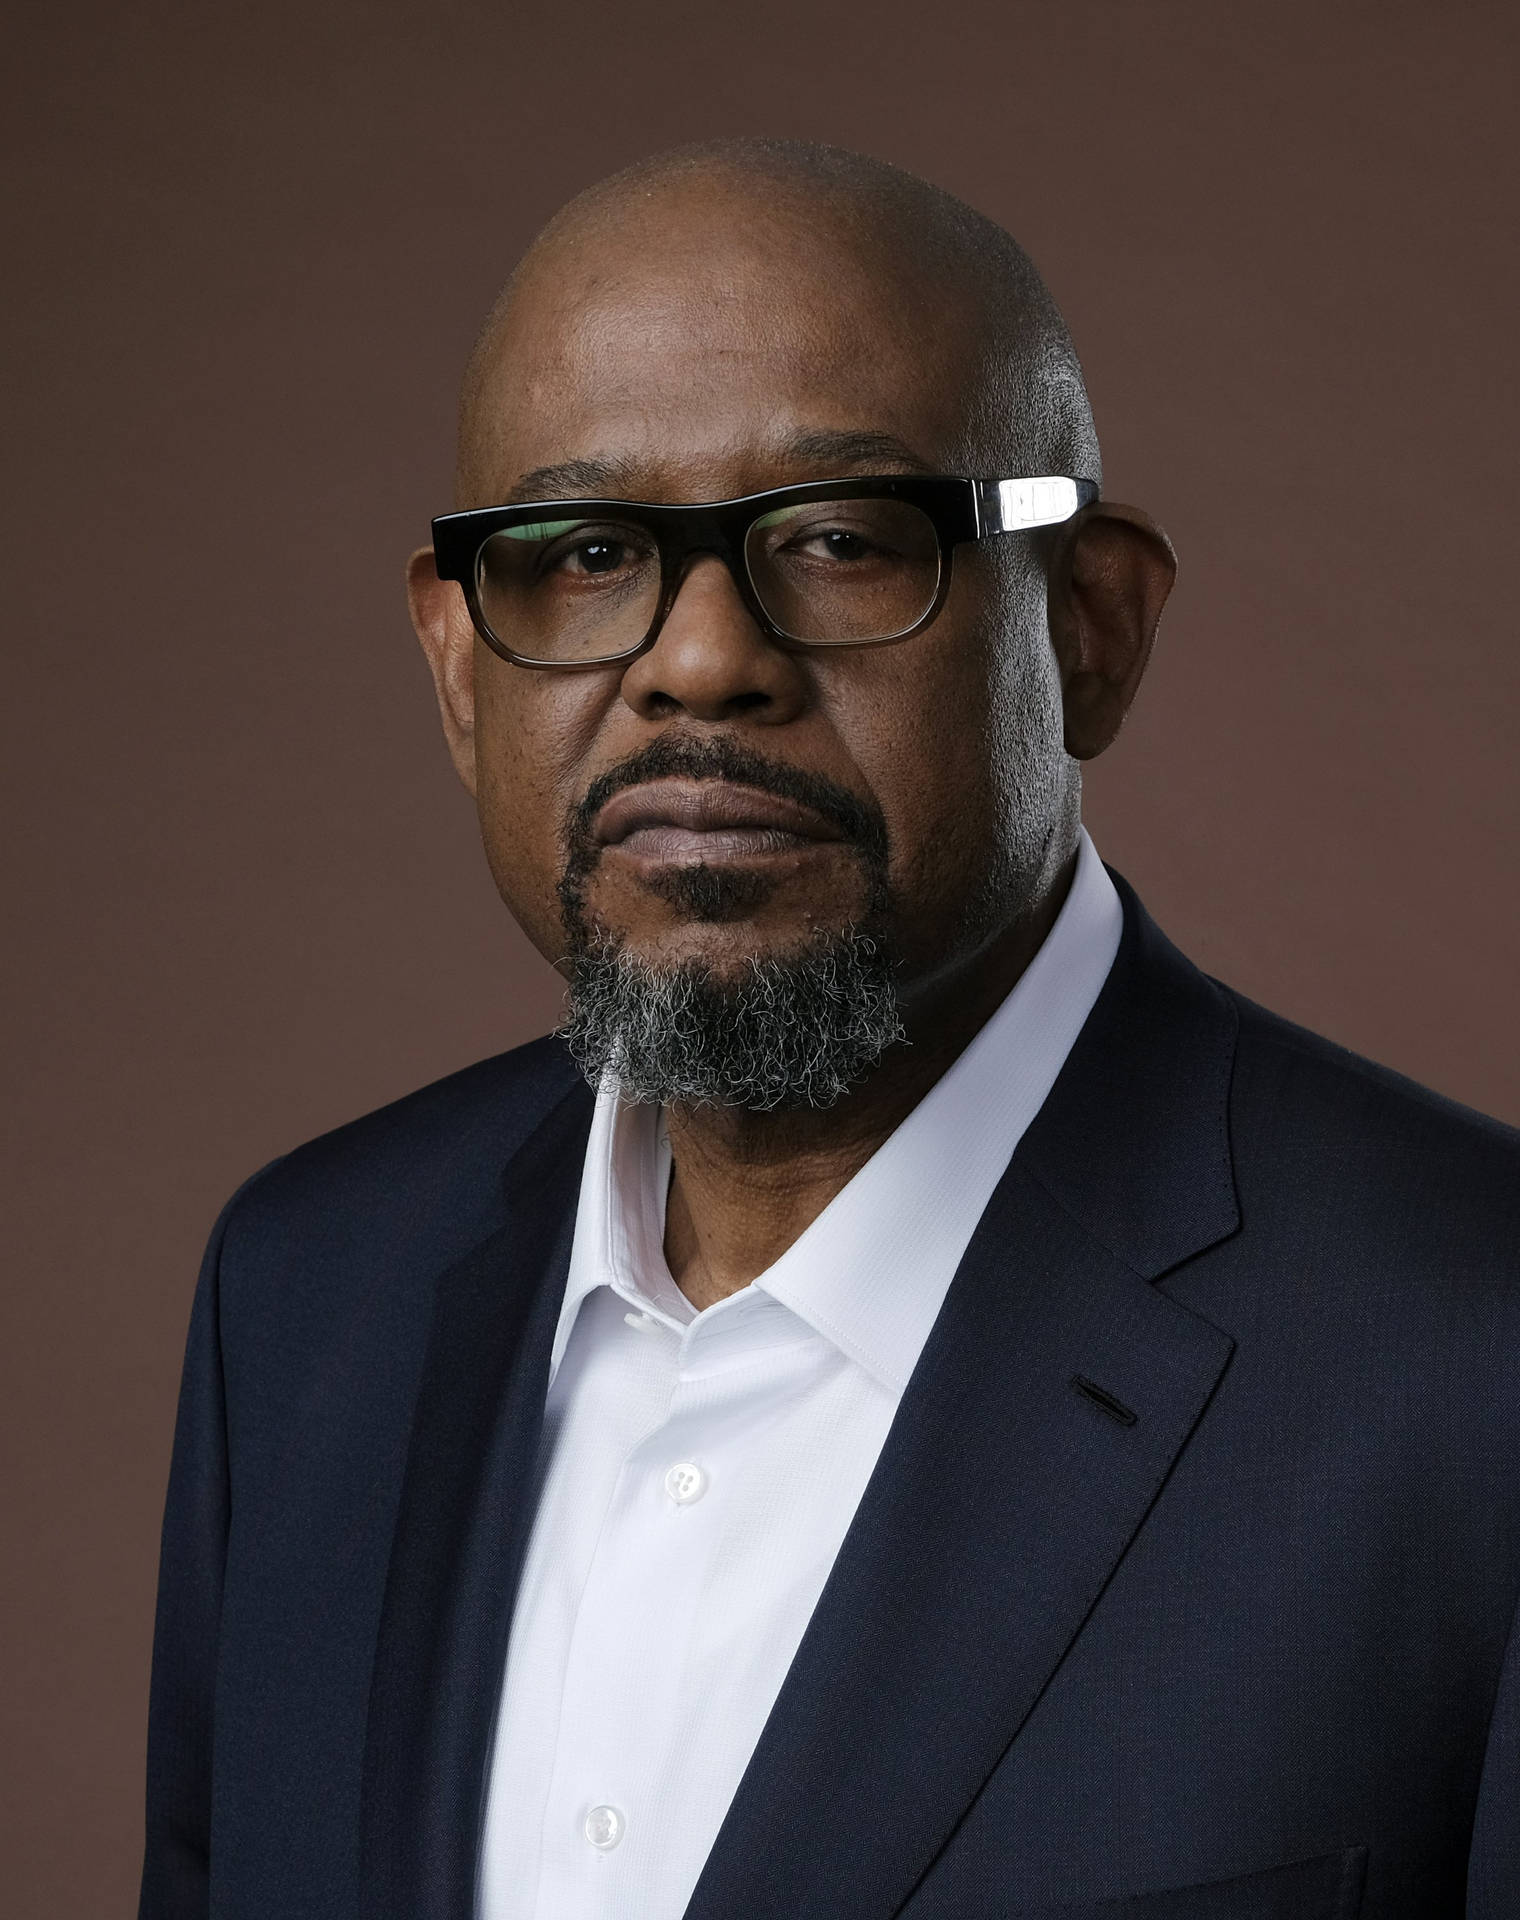 Forest Whitaker Professional 2019 Wallpaper